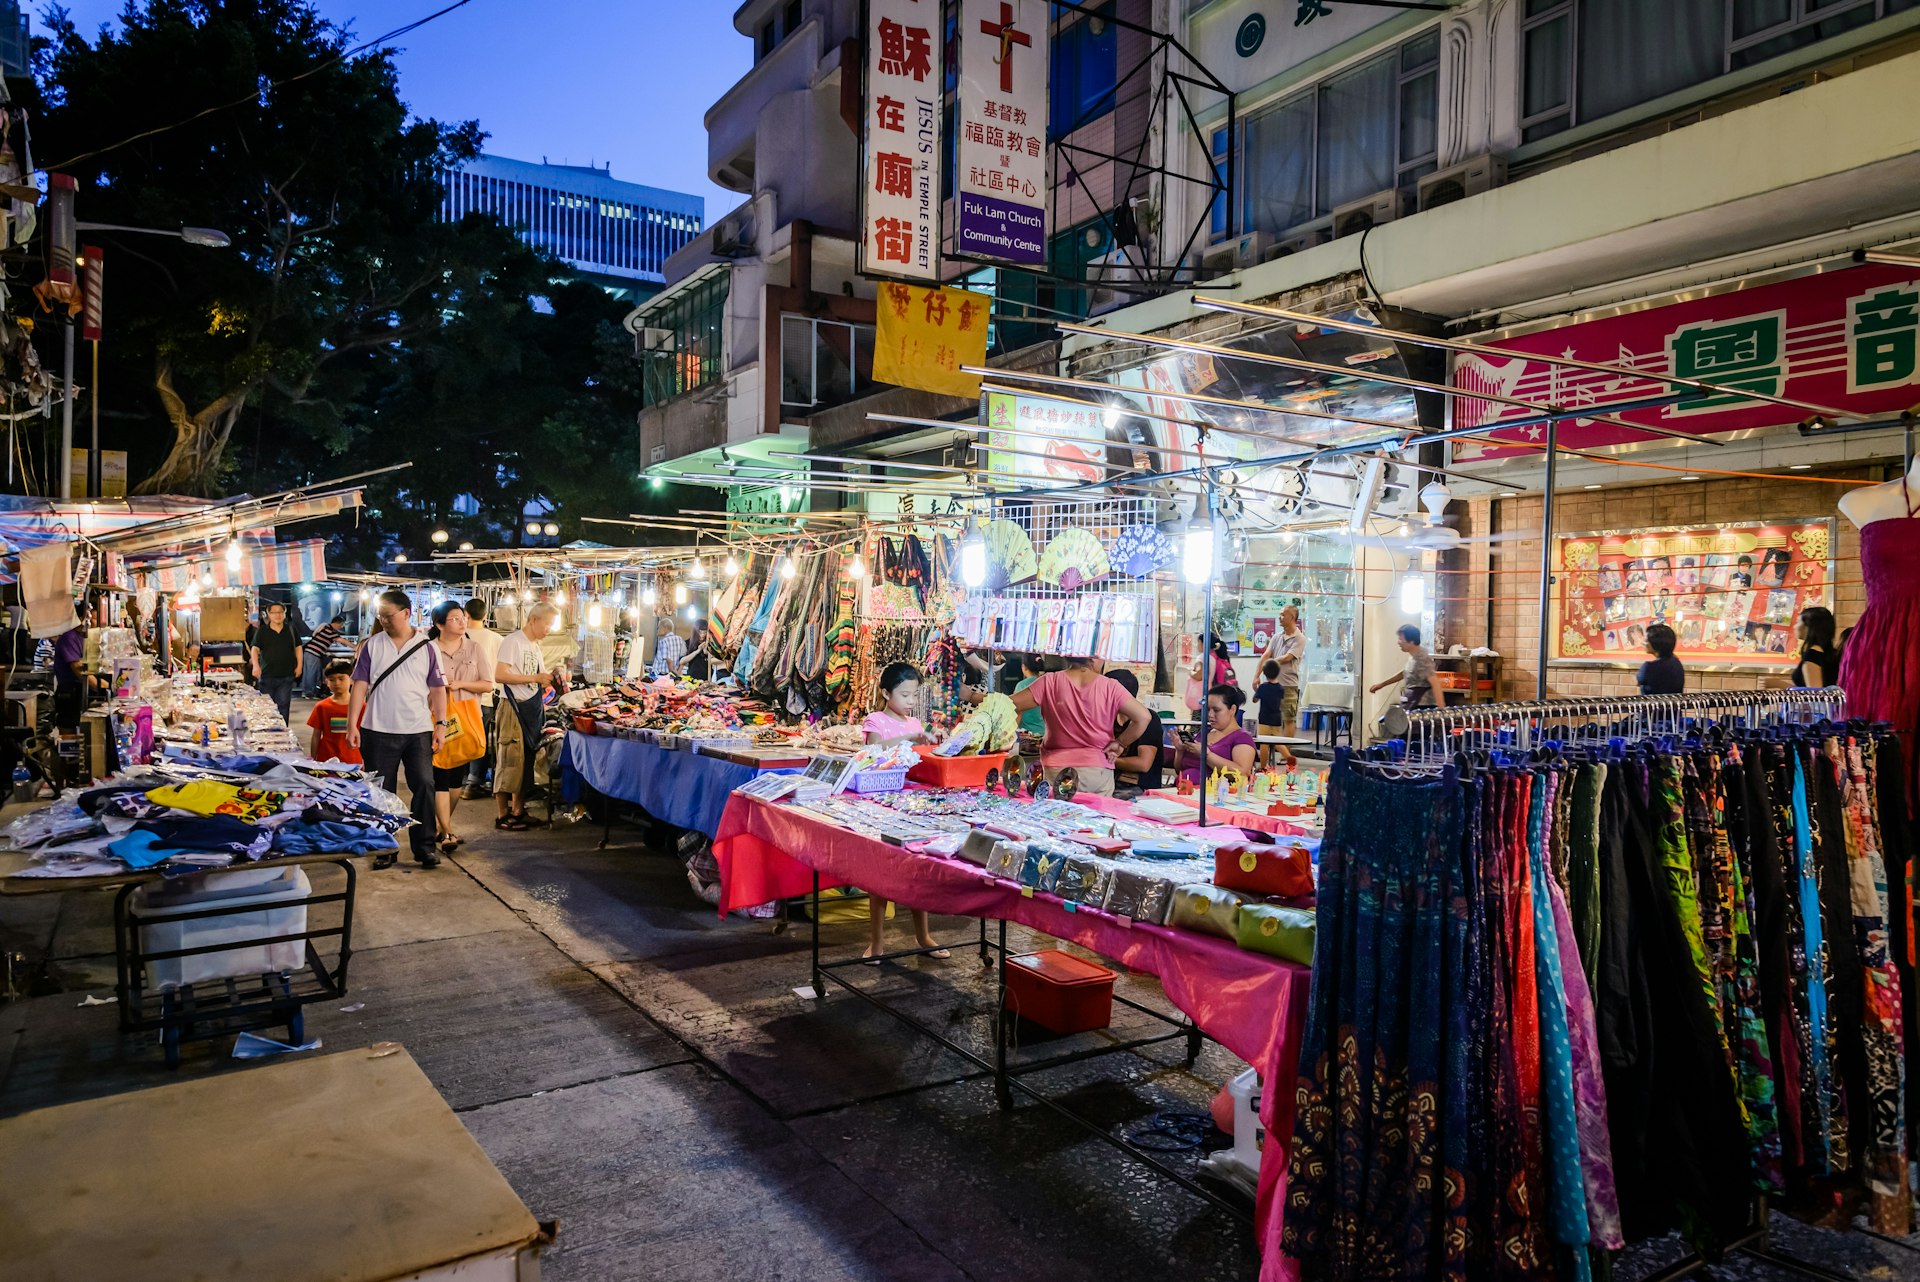 Shopping stalls line a road in Mong Kok; people walk between the tables. Hong Kong.